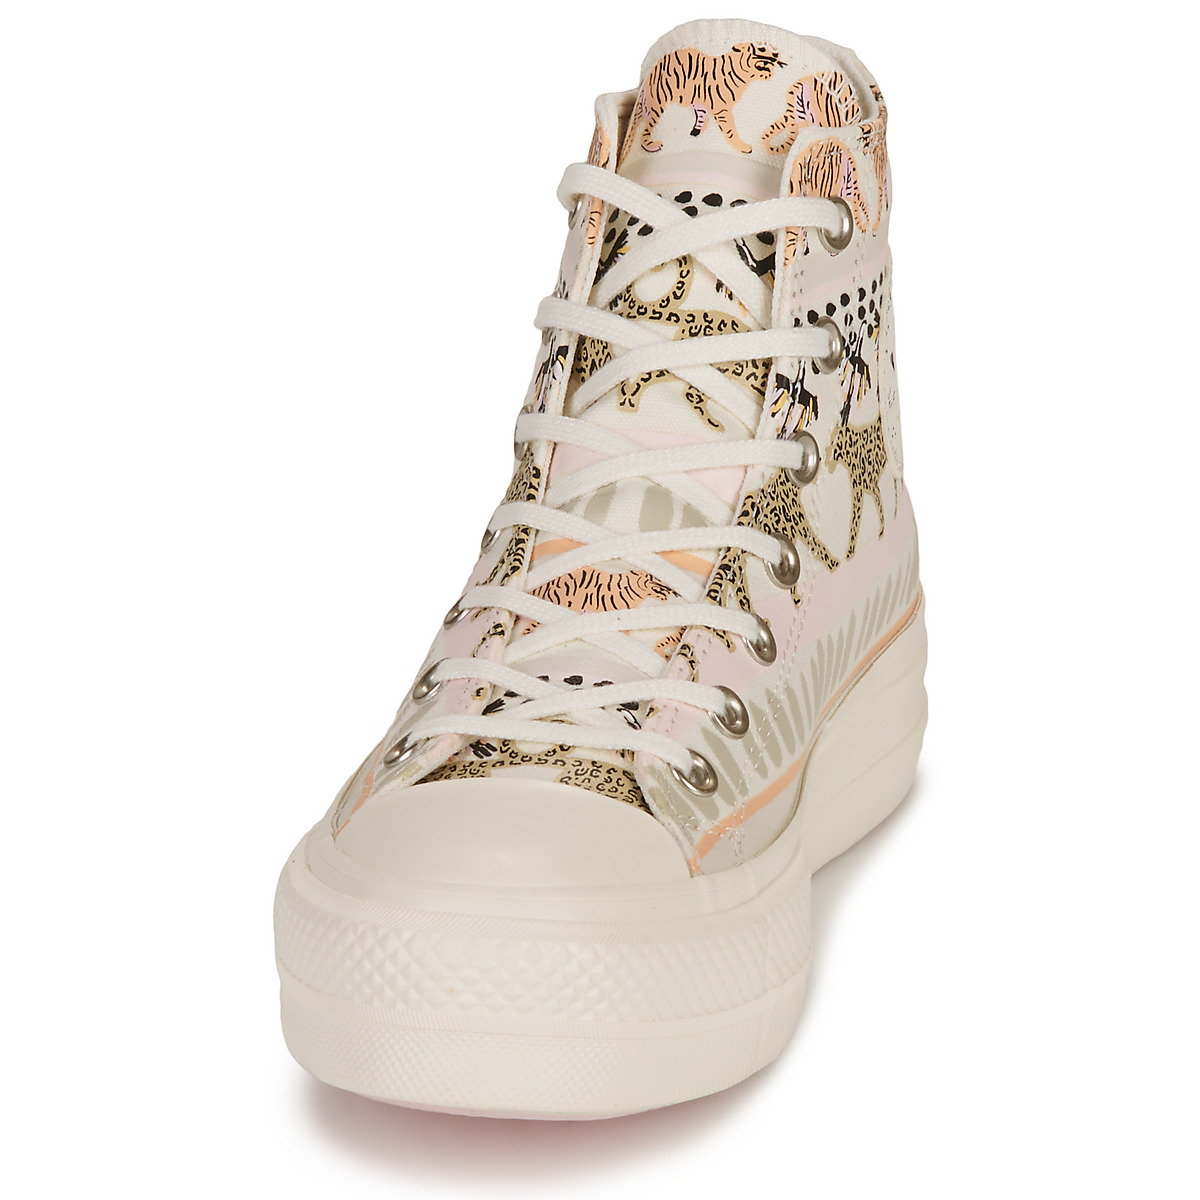 Converse Blanc/Multicolore CHUCK TAYLOR ALL STAR LIFT-ANIMAL ABSTRACT cY8CpmRv